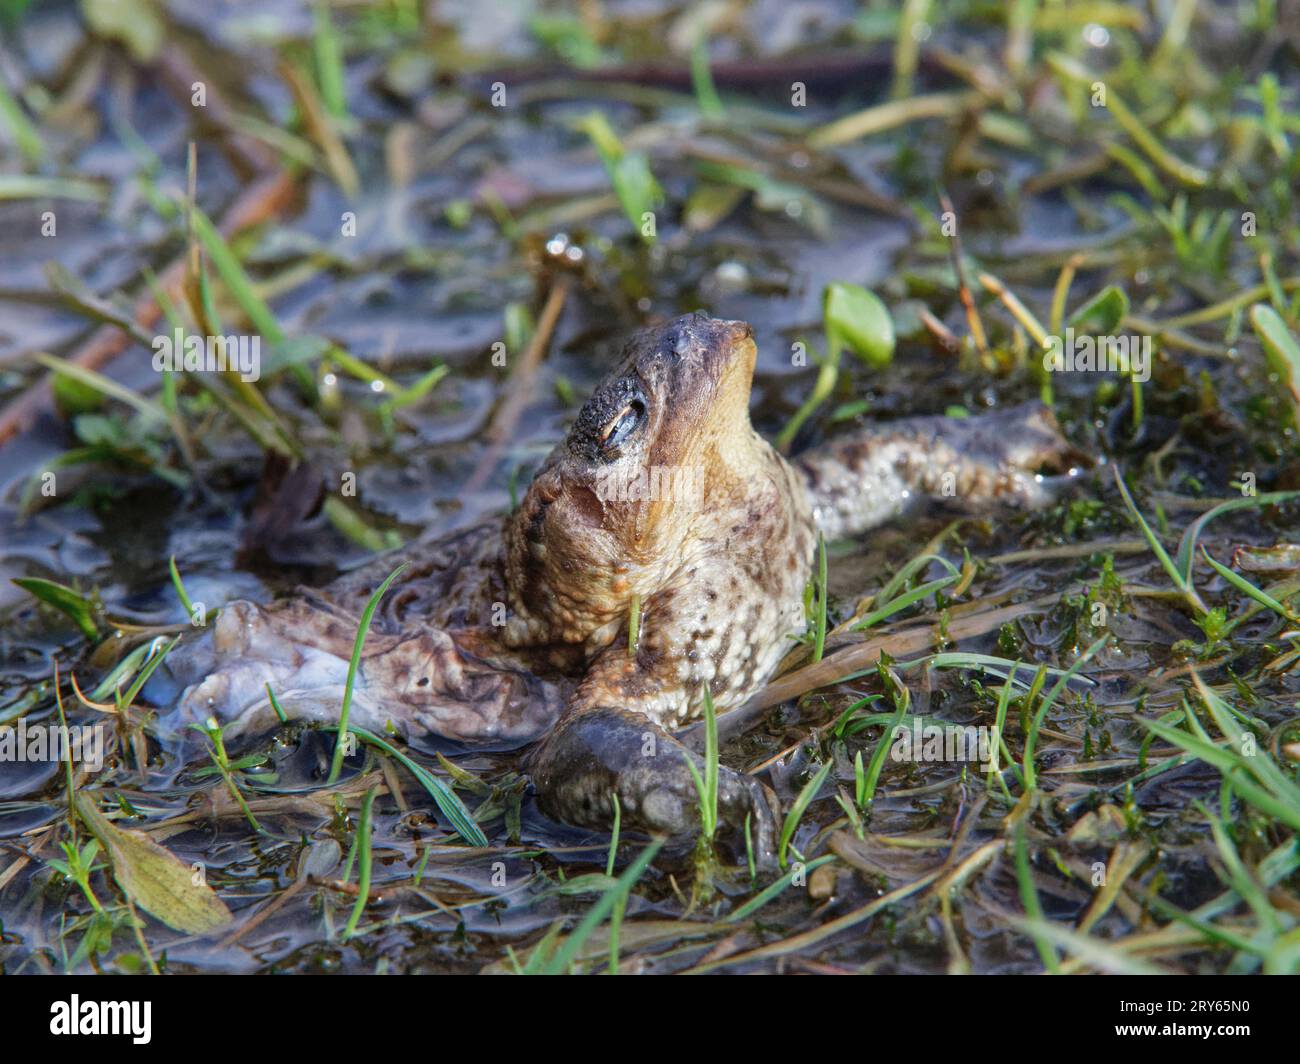 European toad (Bufo bufo) partially eaten by a Carrion crow (Corvus corone) which skinned and removed the back legs, leaving the toxic skin, UK, March Stock Photo